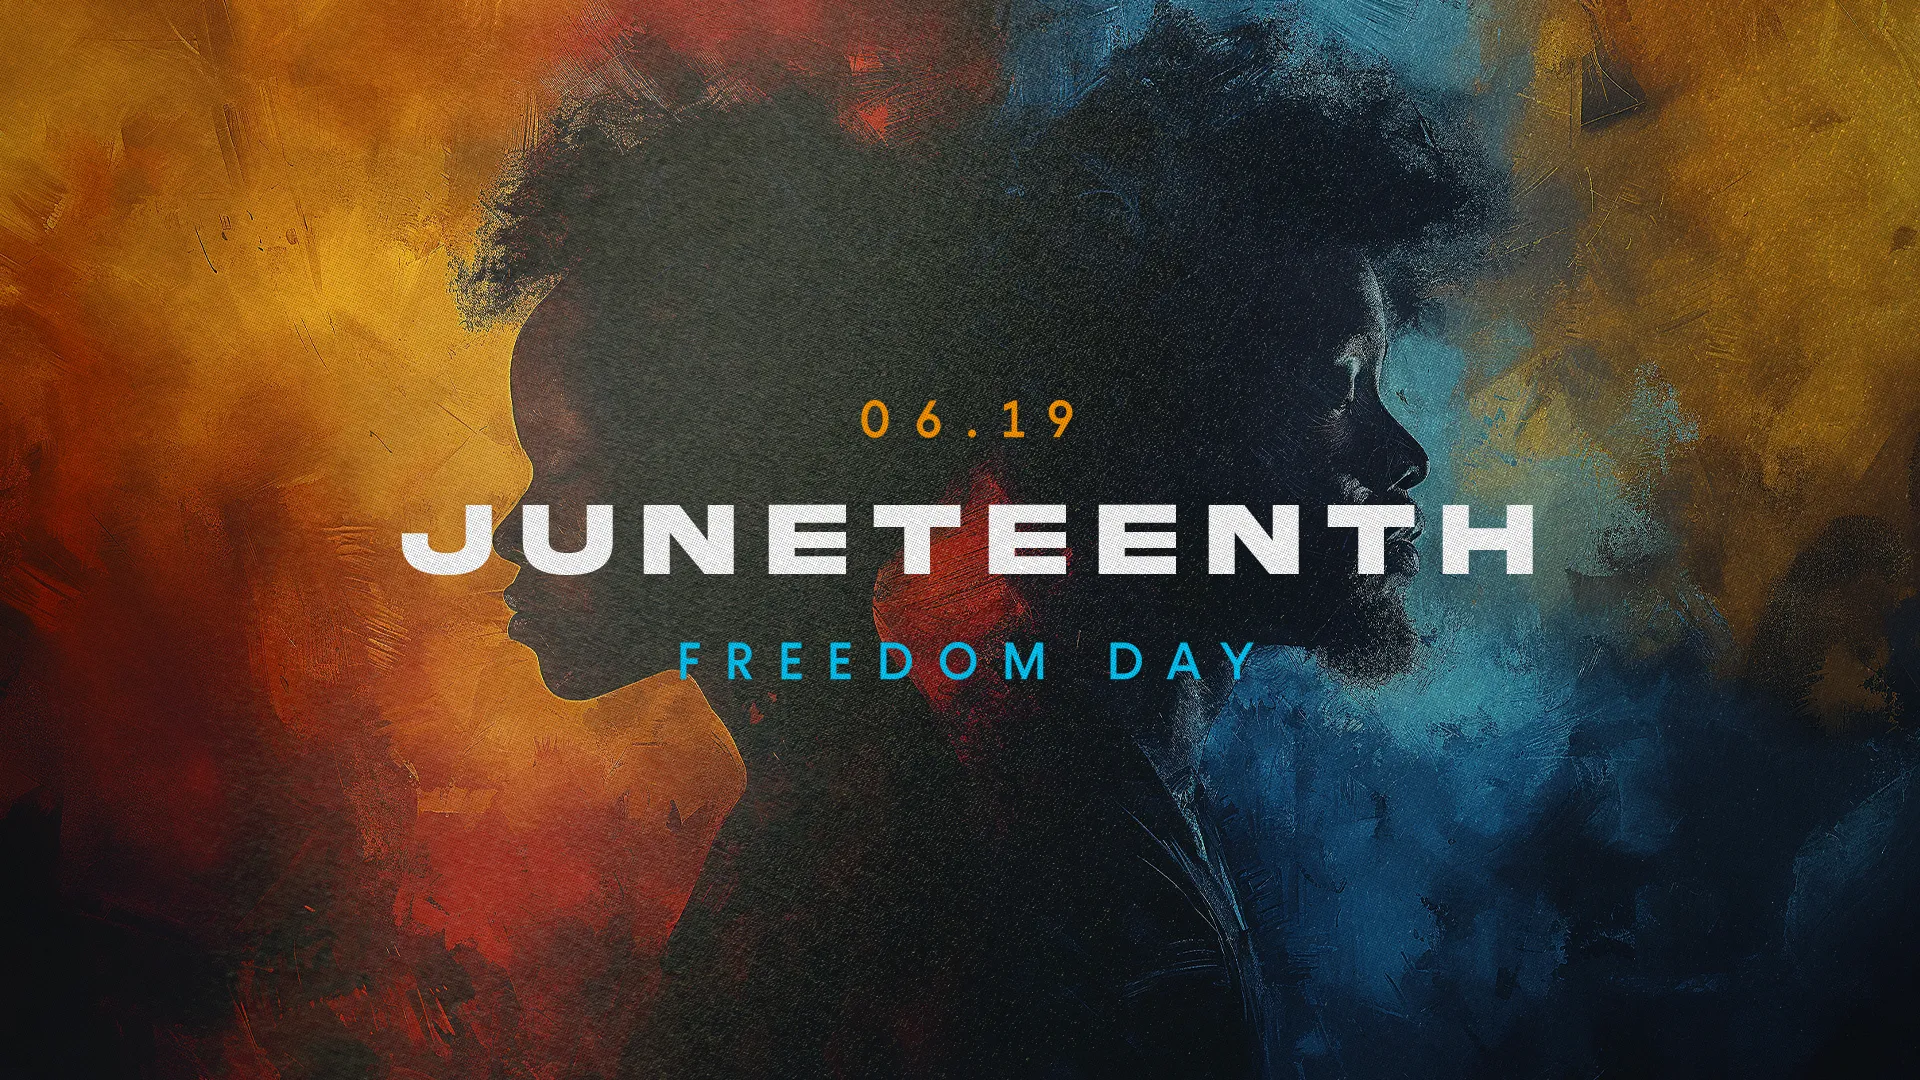 Elevate Your Church'S Juneteenth Celebration With This Visually Striking, High-Impact Graphic. Perfect For Inspiring Reflection And Community Engagement, This Design Beautifully Encapsulates The Spirit Of Freedom Day.